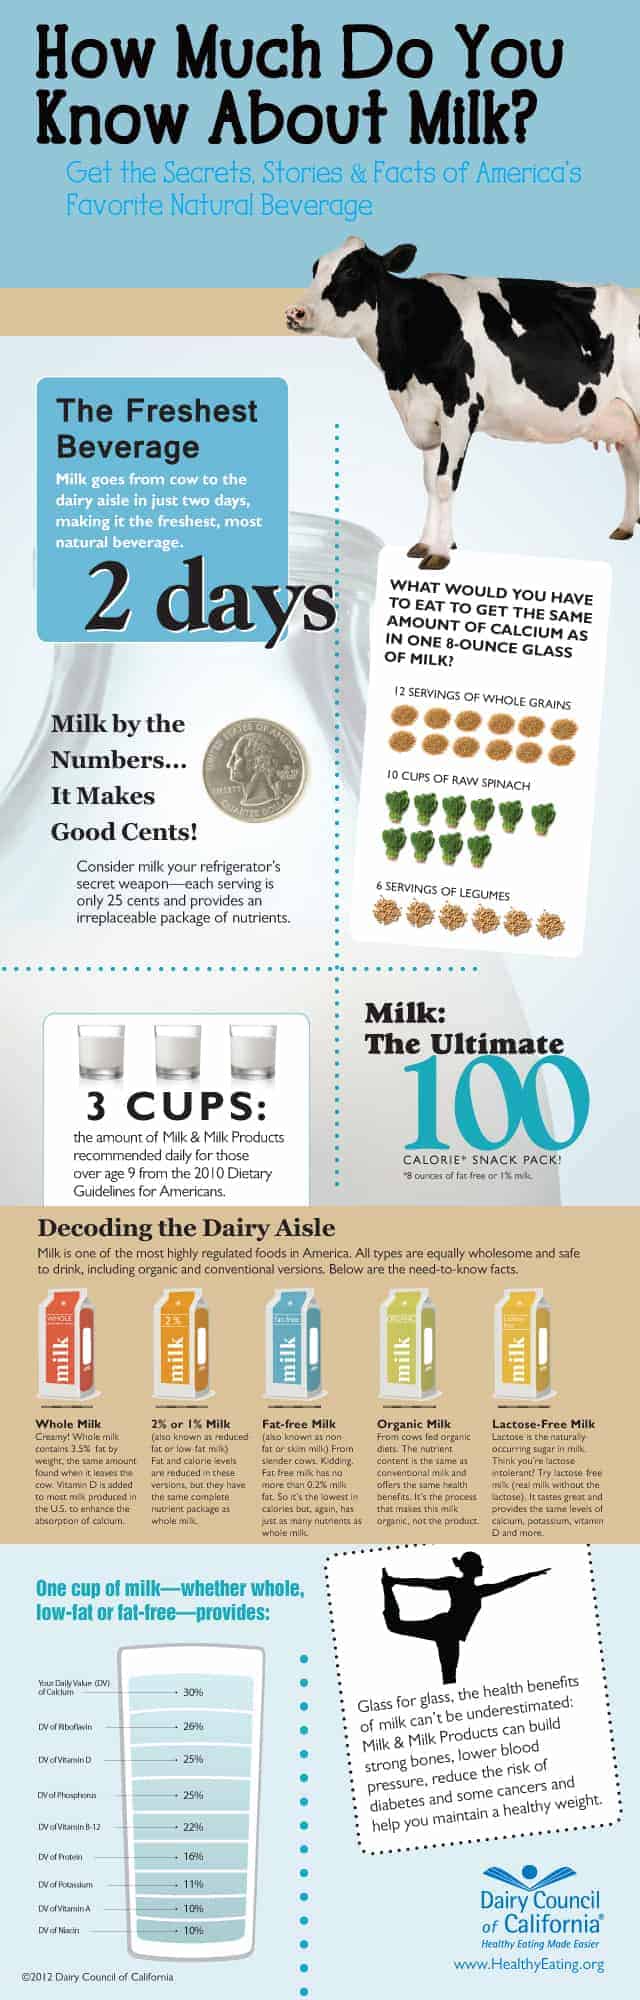 How Much Do You Know About Milk